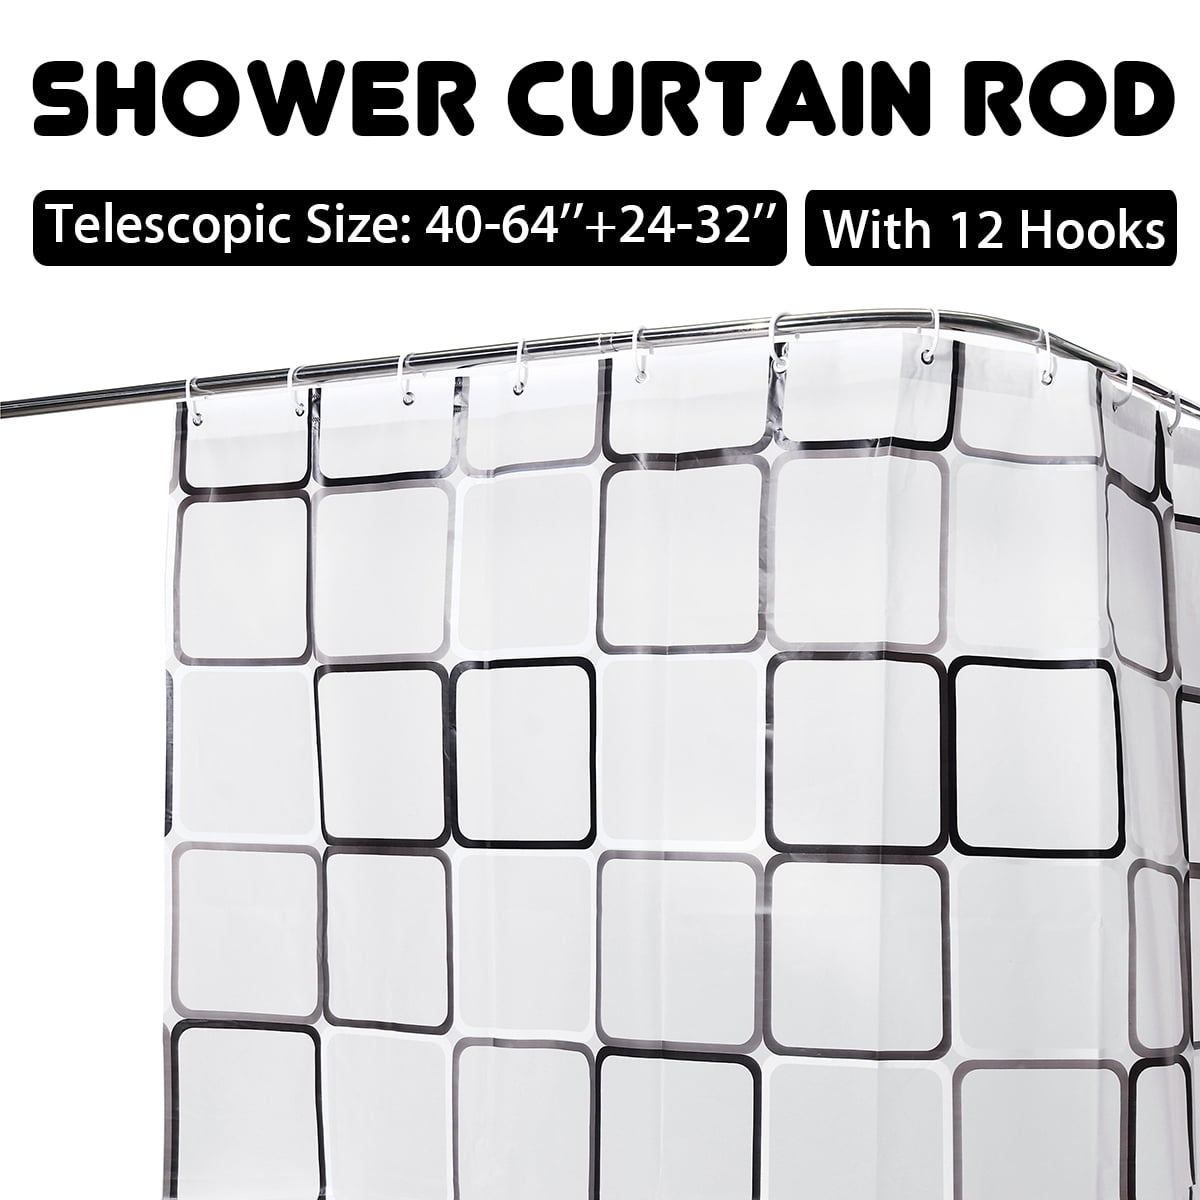 Details about   Stainless Steel Extendable Telescopic Shower Curtain Pole Rod Bath Doo iy pe 